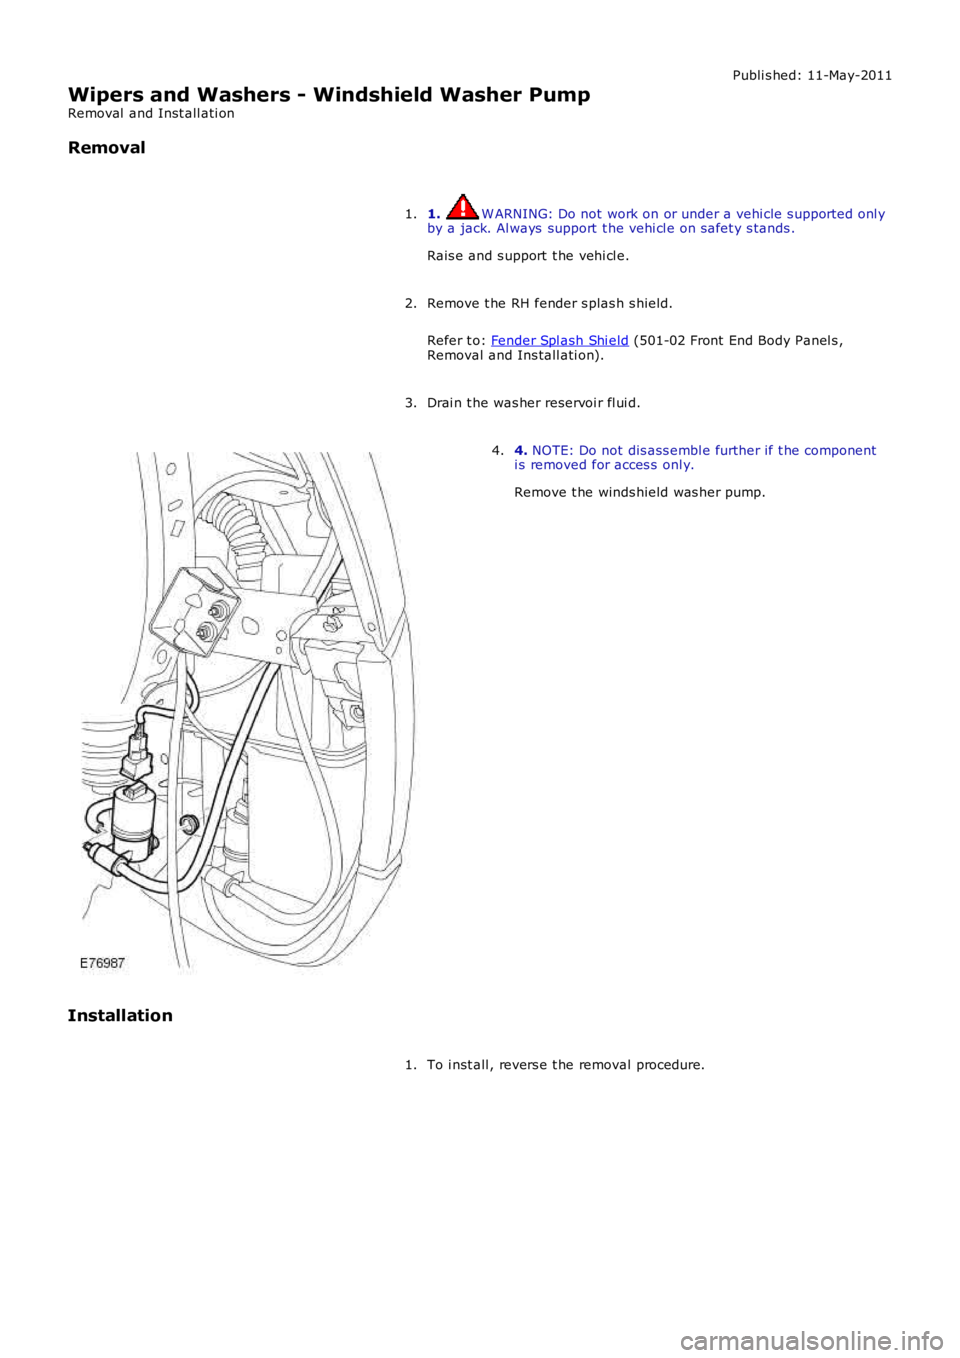 LAND ROVER FRELANDER 2 2006  Repair Manual Publi s hed: 11-May-2011
Wipers and Washers - Windshield Washer Pump
Removal  and Inst all ati on
Removal
1. W ARNING: Do not work on or under a vehi cle s upported onl yby a jack. Al ways  support  t